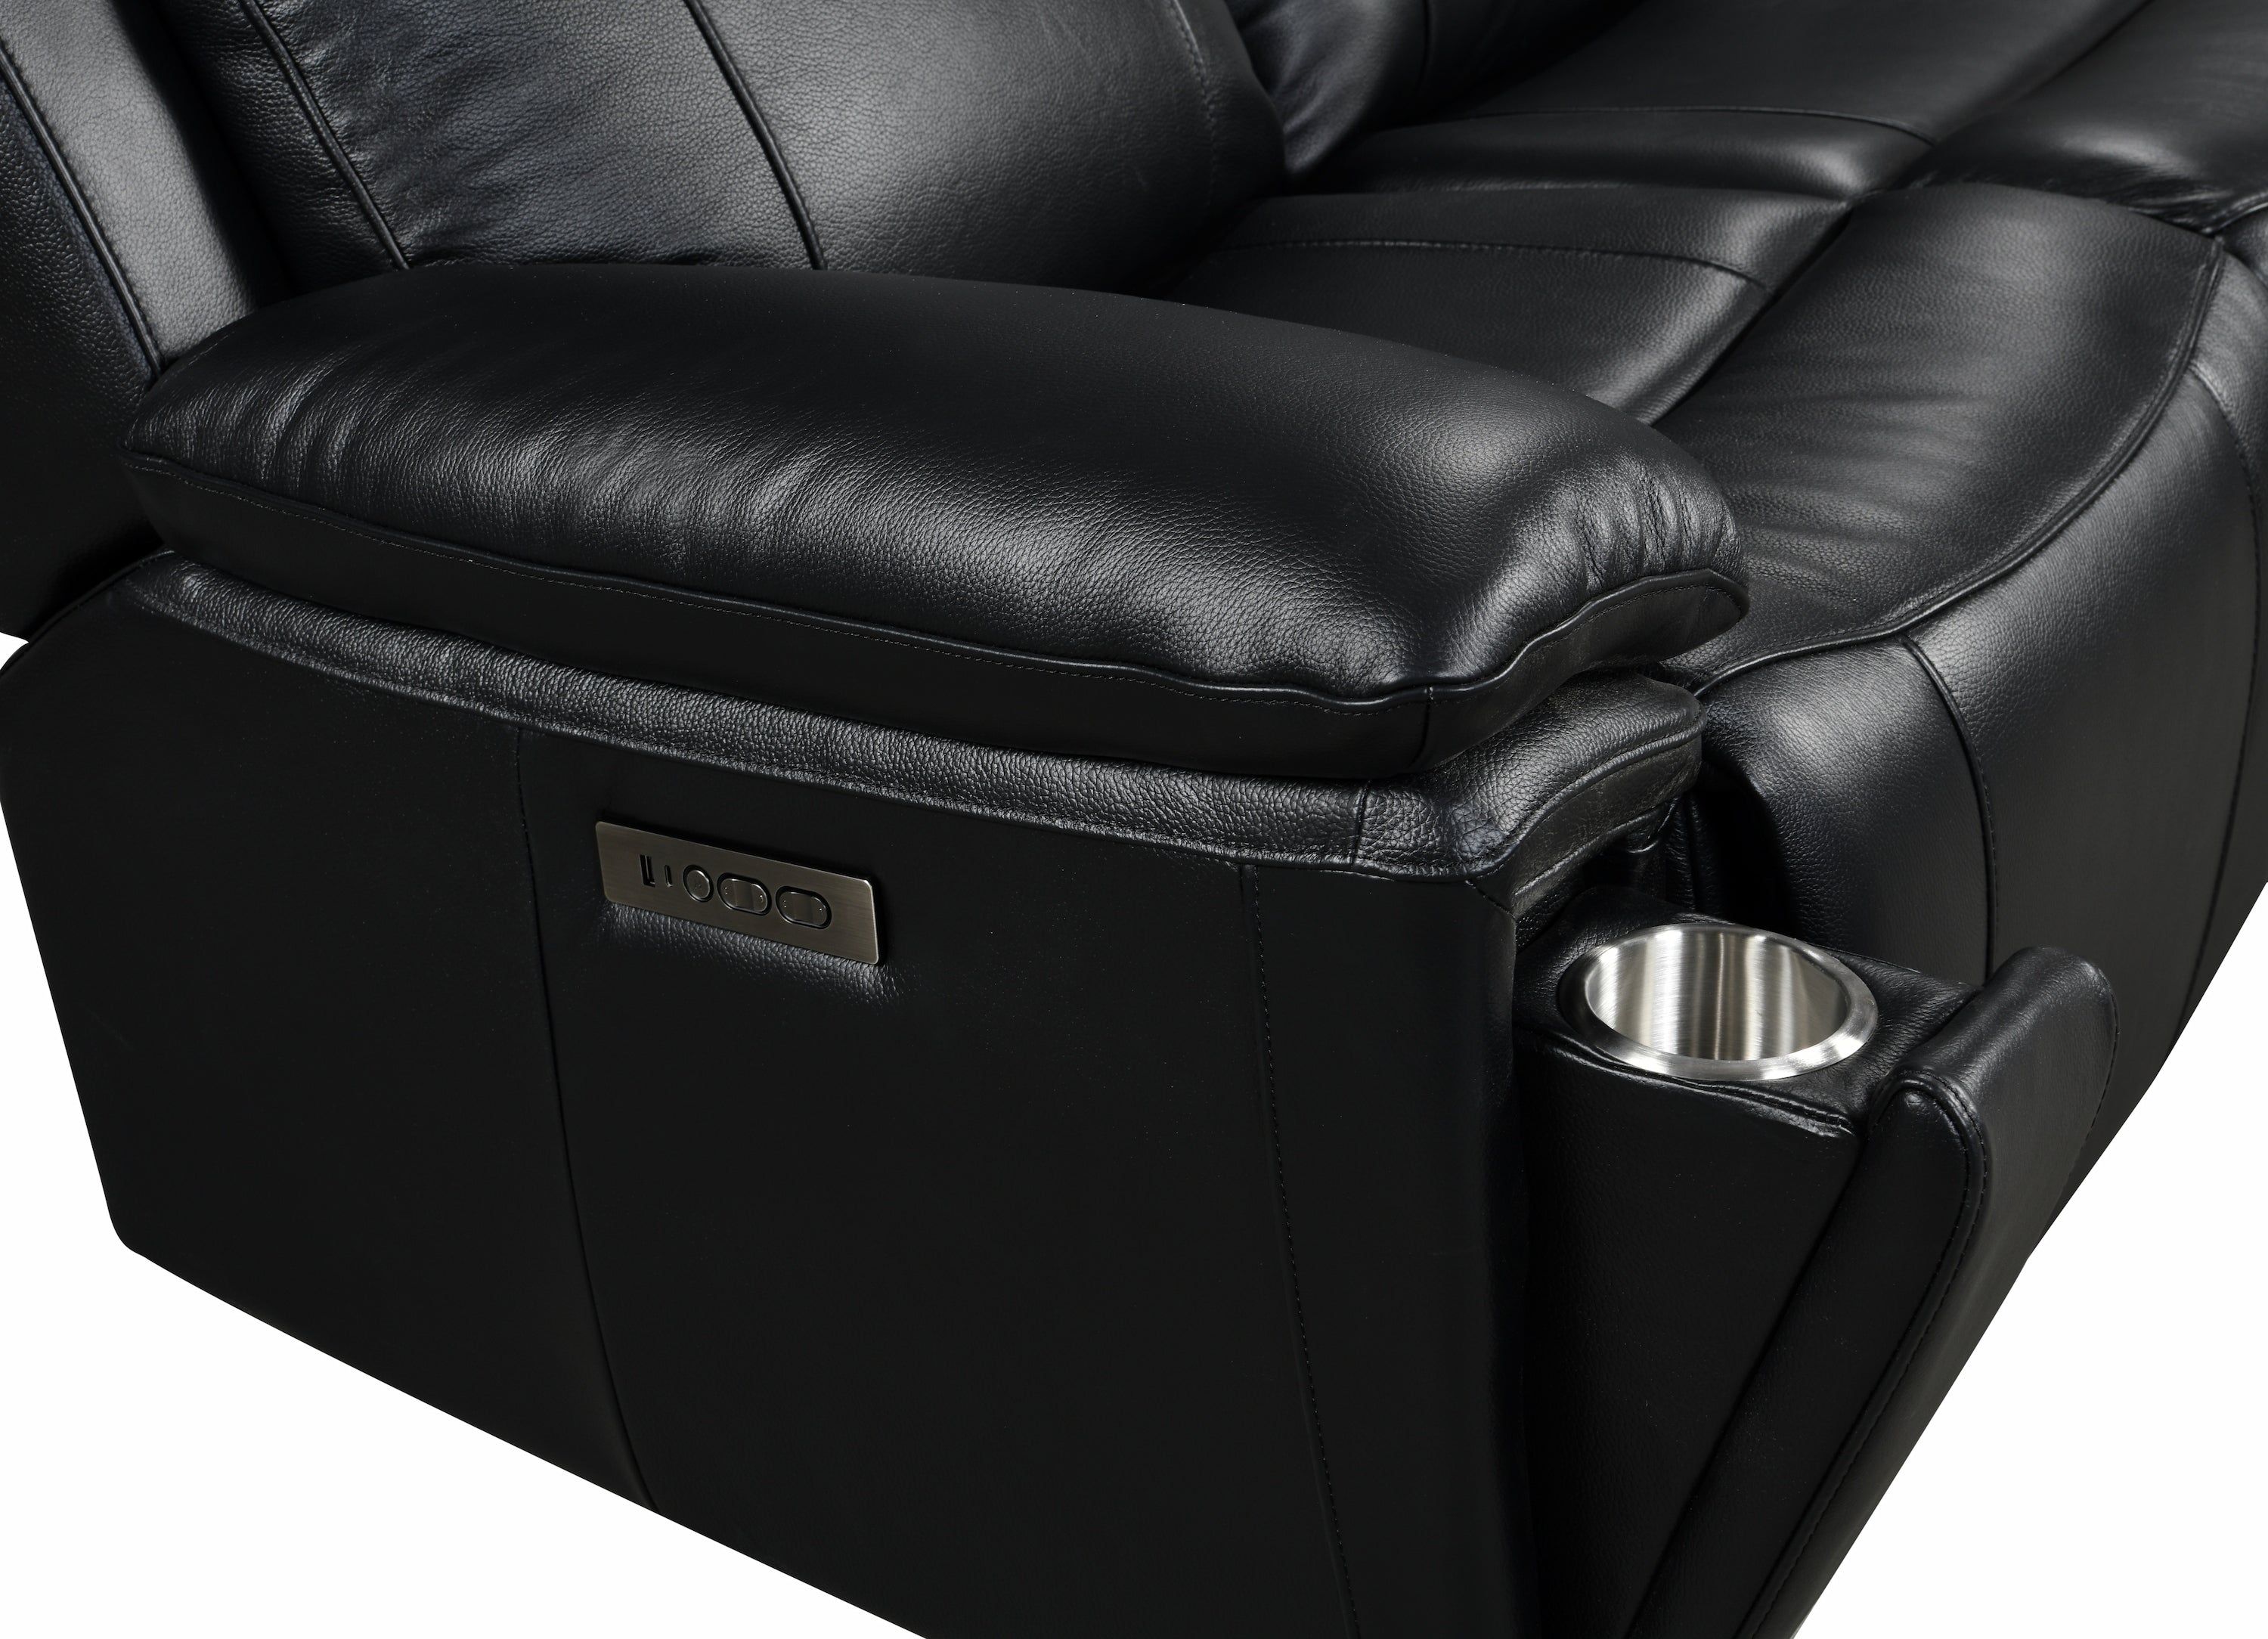 Savio 2 Seater Leather Sofa with Power Recliners, Power Headrests and Cup Holders